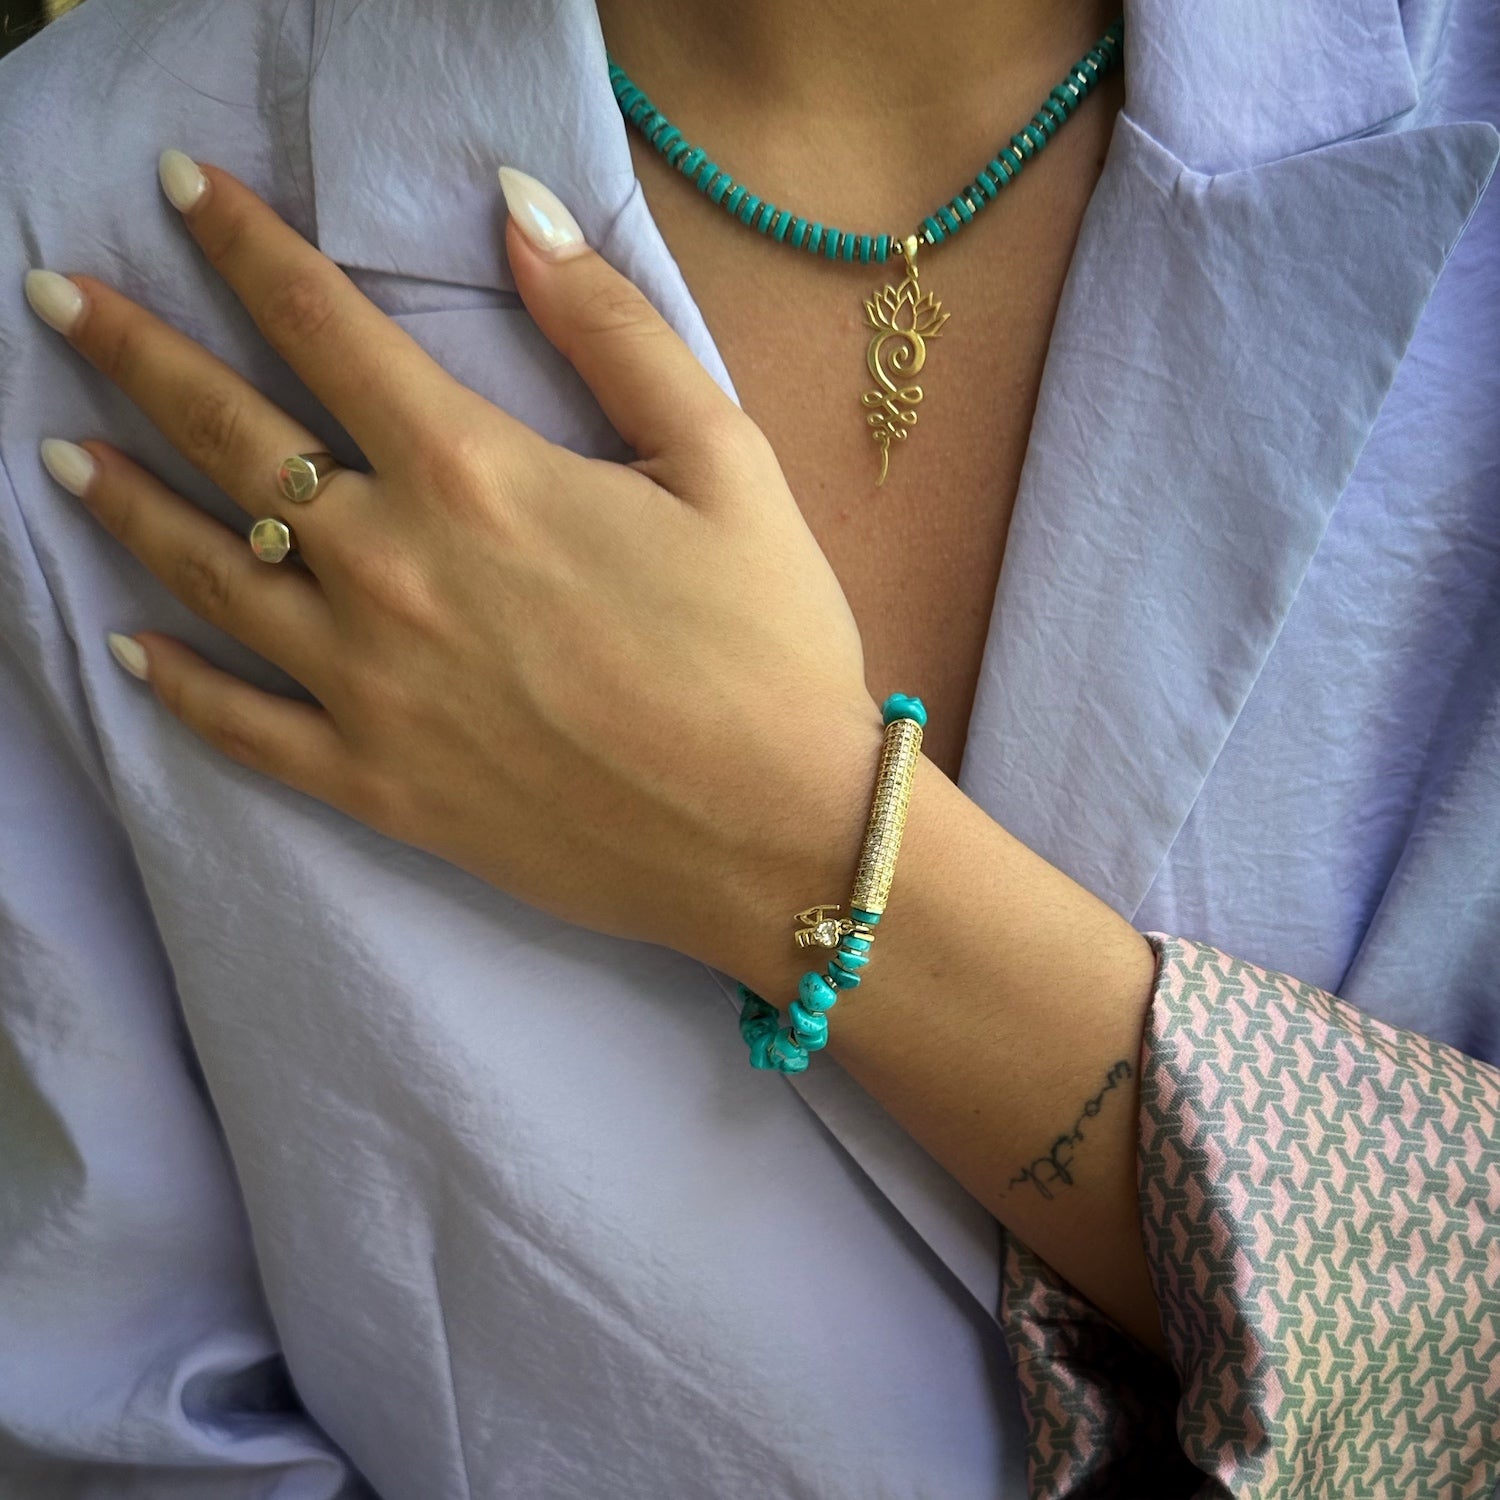 A hand model wearing the Diamond and Turquoise Love Bracelet, displaying its elegant design with turquoise stone beads, gold hematite spacers, and a gold plated love charm with a simulated diamond. The bracelet's stretchy jewelry cord ensures a comfortable fit.